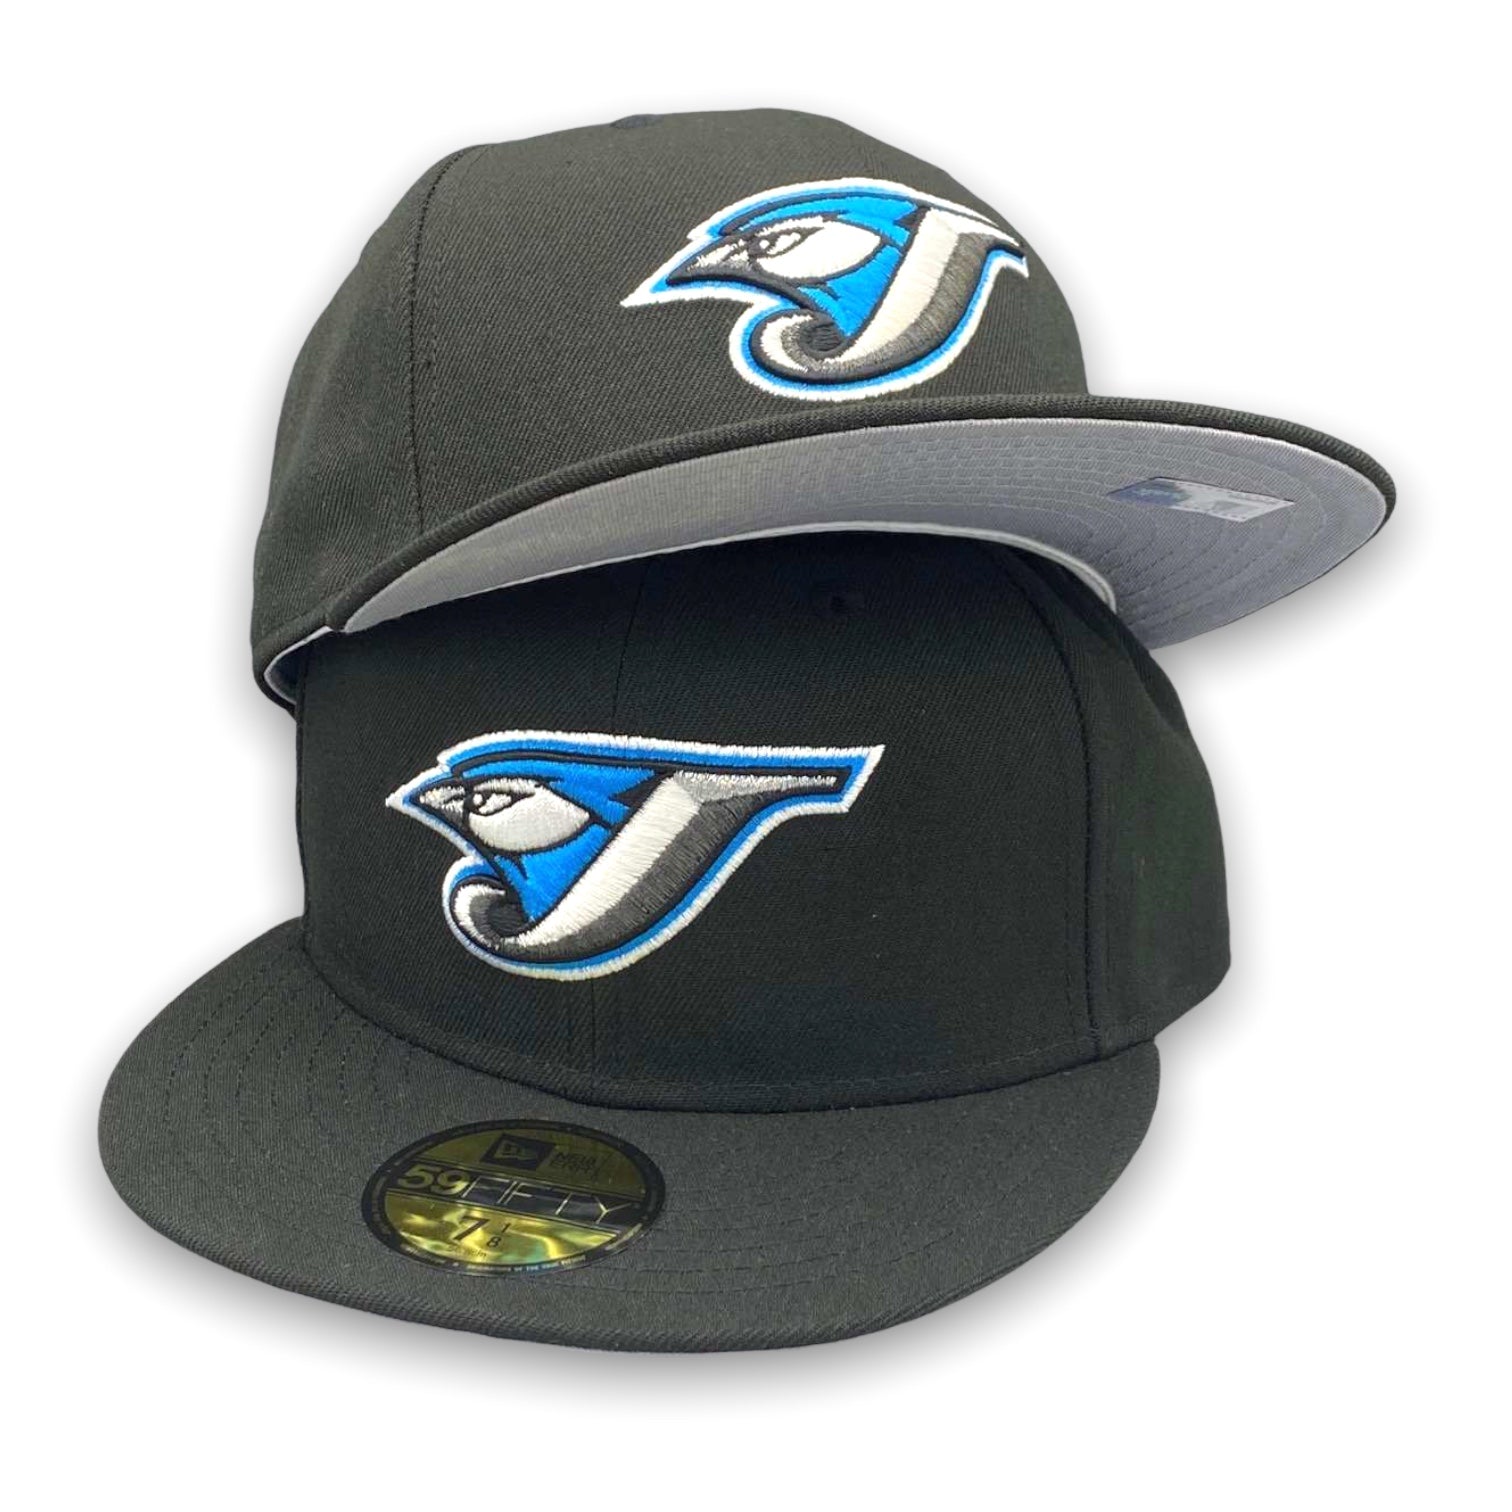 New Toronto Blue Jays Baseball Caps - New Era 59FIFTY - clothing &  accessories - by owner - apparel sale - craigslist